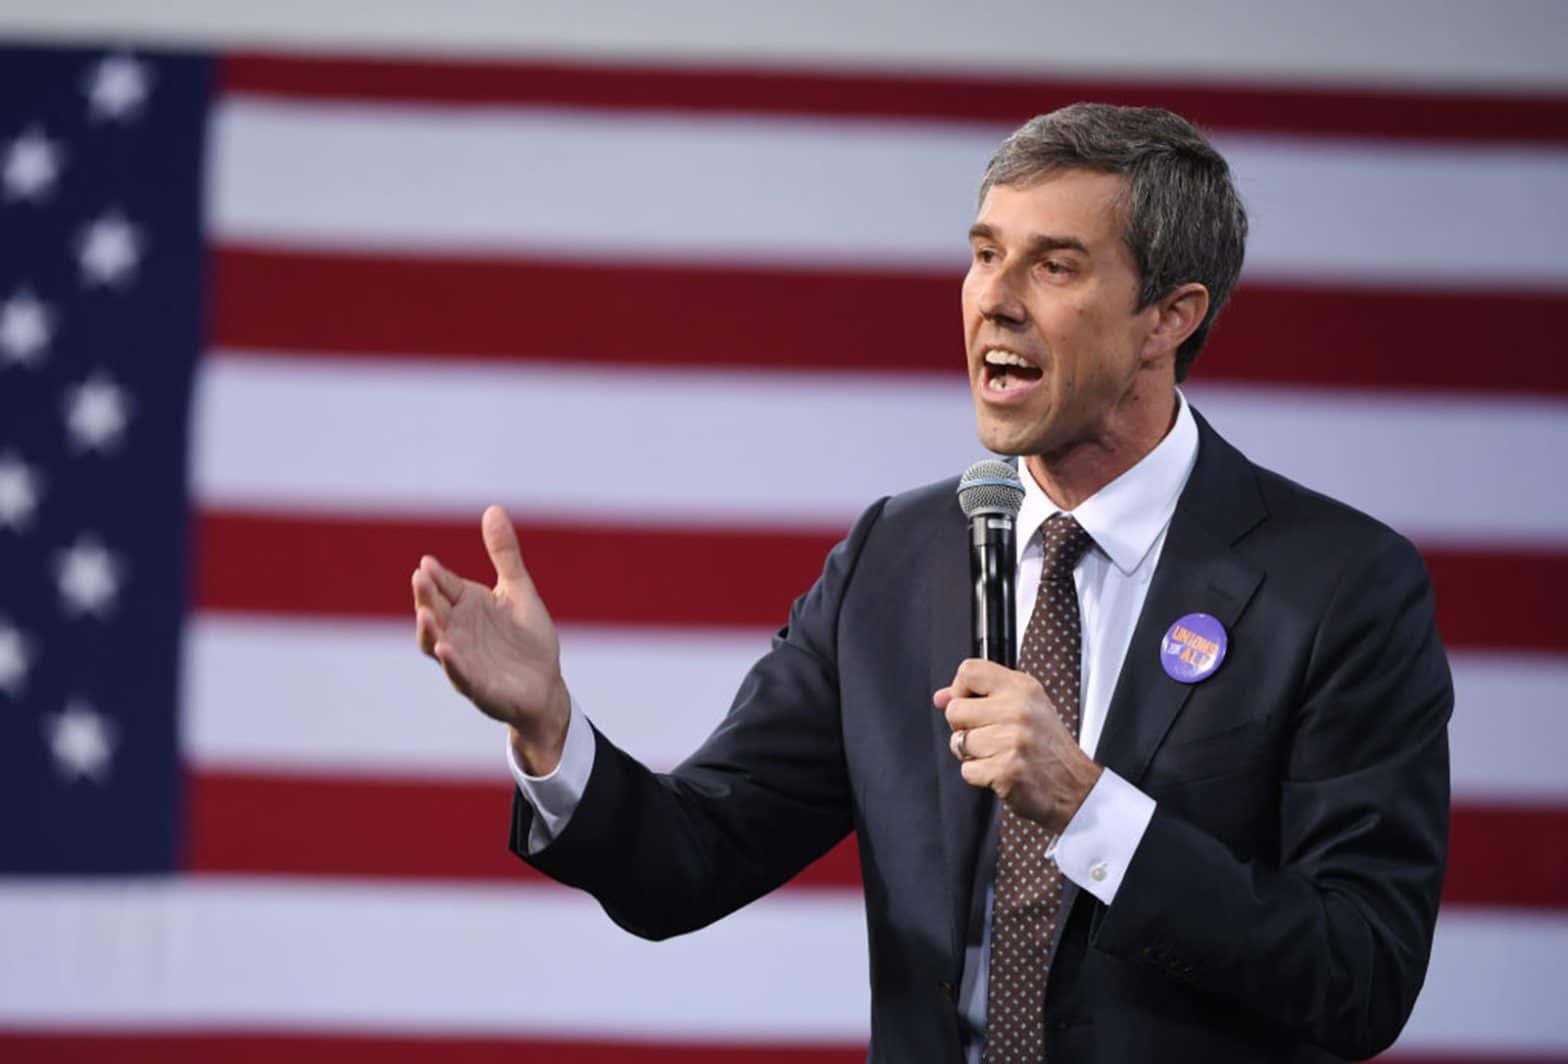 On the Campaign Trail, Beto O’Rourke Focuses on Meeting Primary Voters over Media Appearances